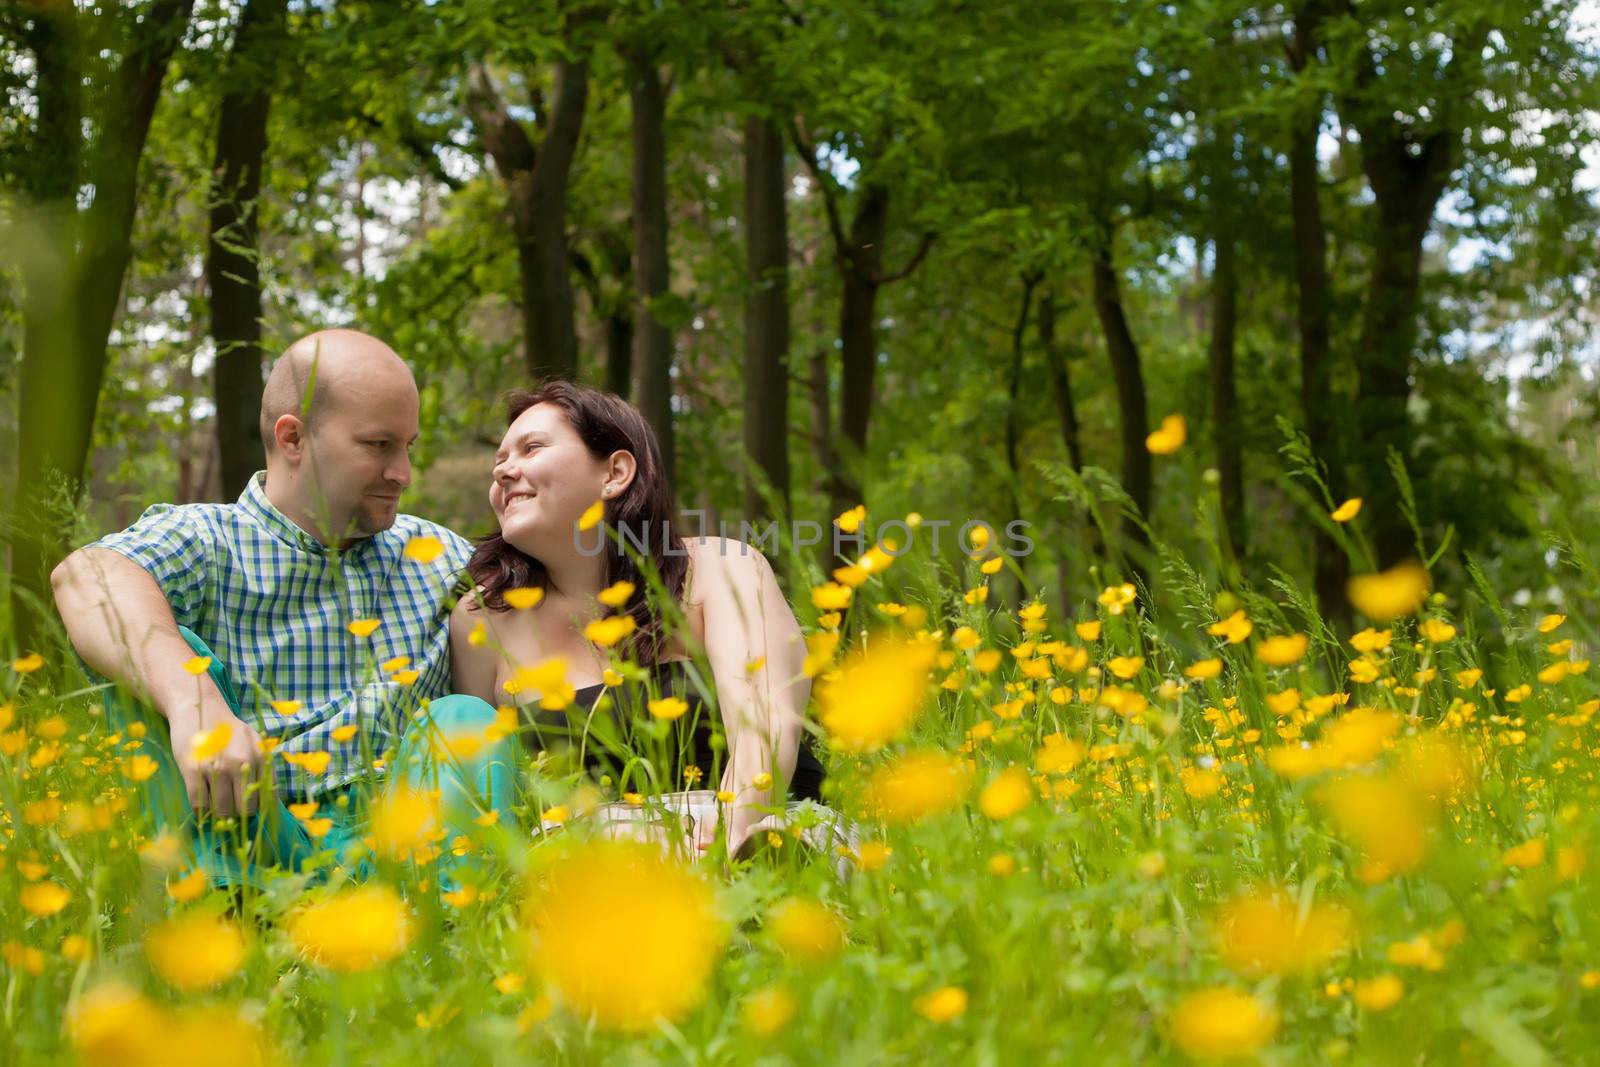 Sweet couple and buttercups by DNFStyle